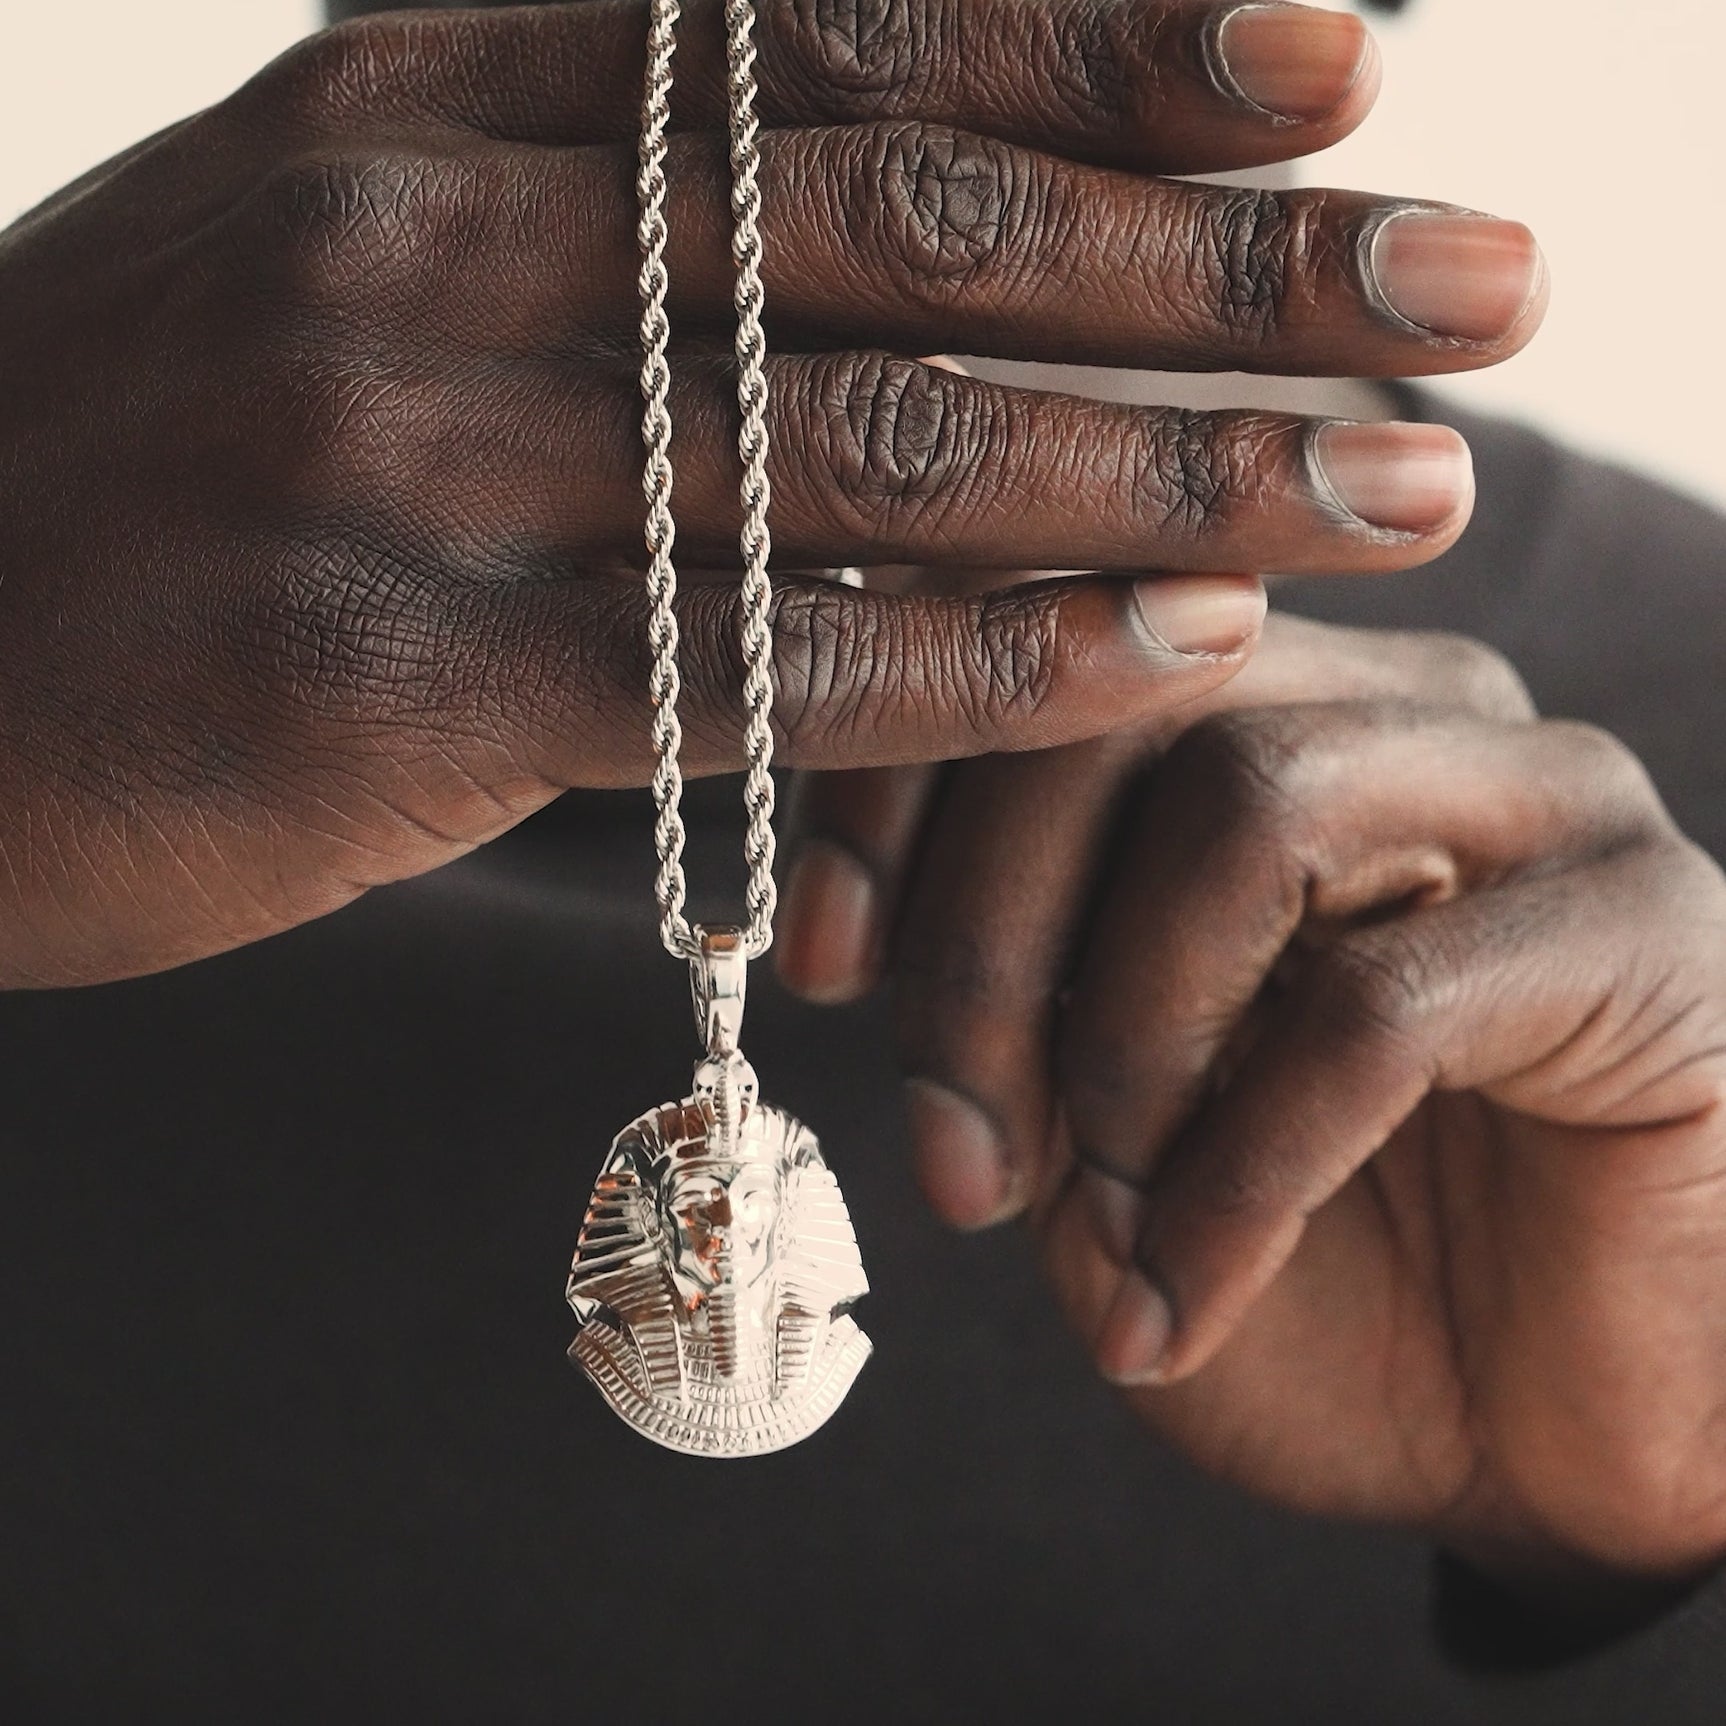 Pharaoh Head V2 Necklace Pendant & Rope Chain The Gold Gods Men's Jewelry Video White Gold